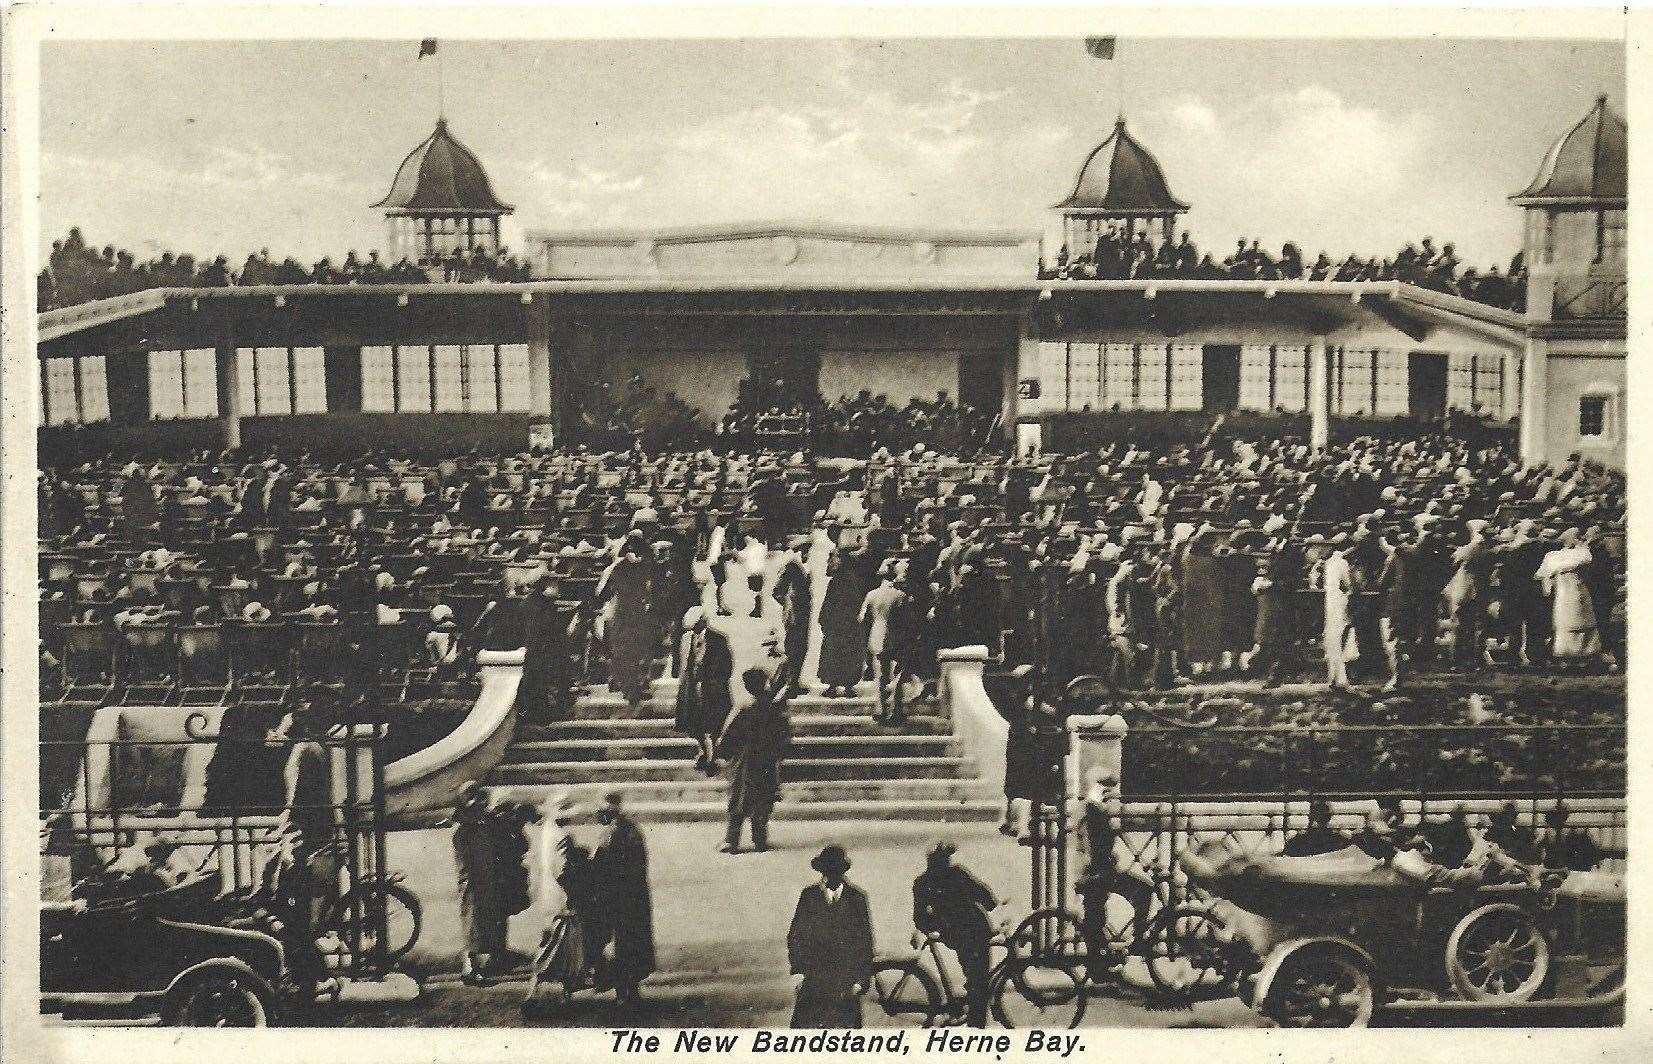 Herne Bay bandstand in its original form in 1930. Picture: Herne Bay Historical Society